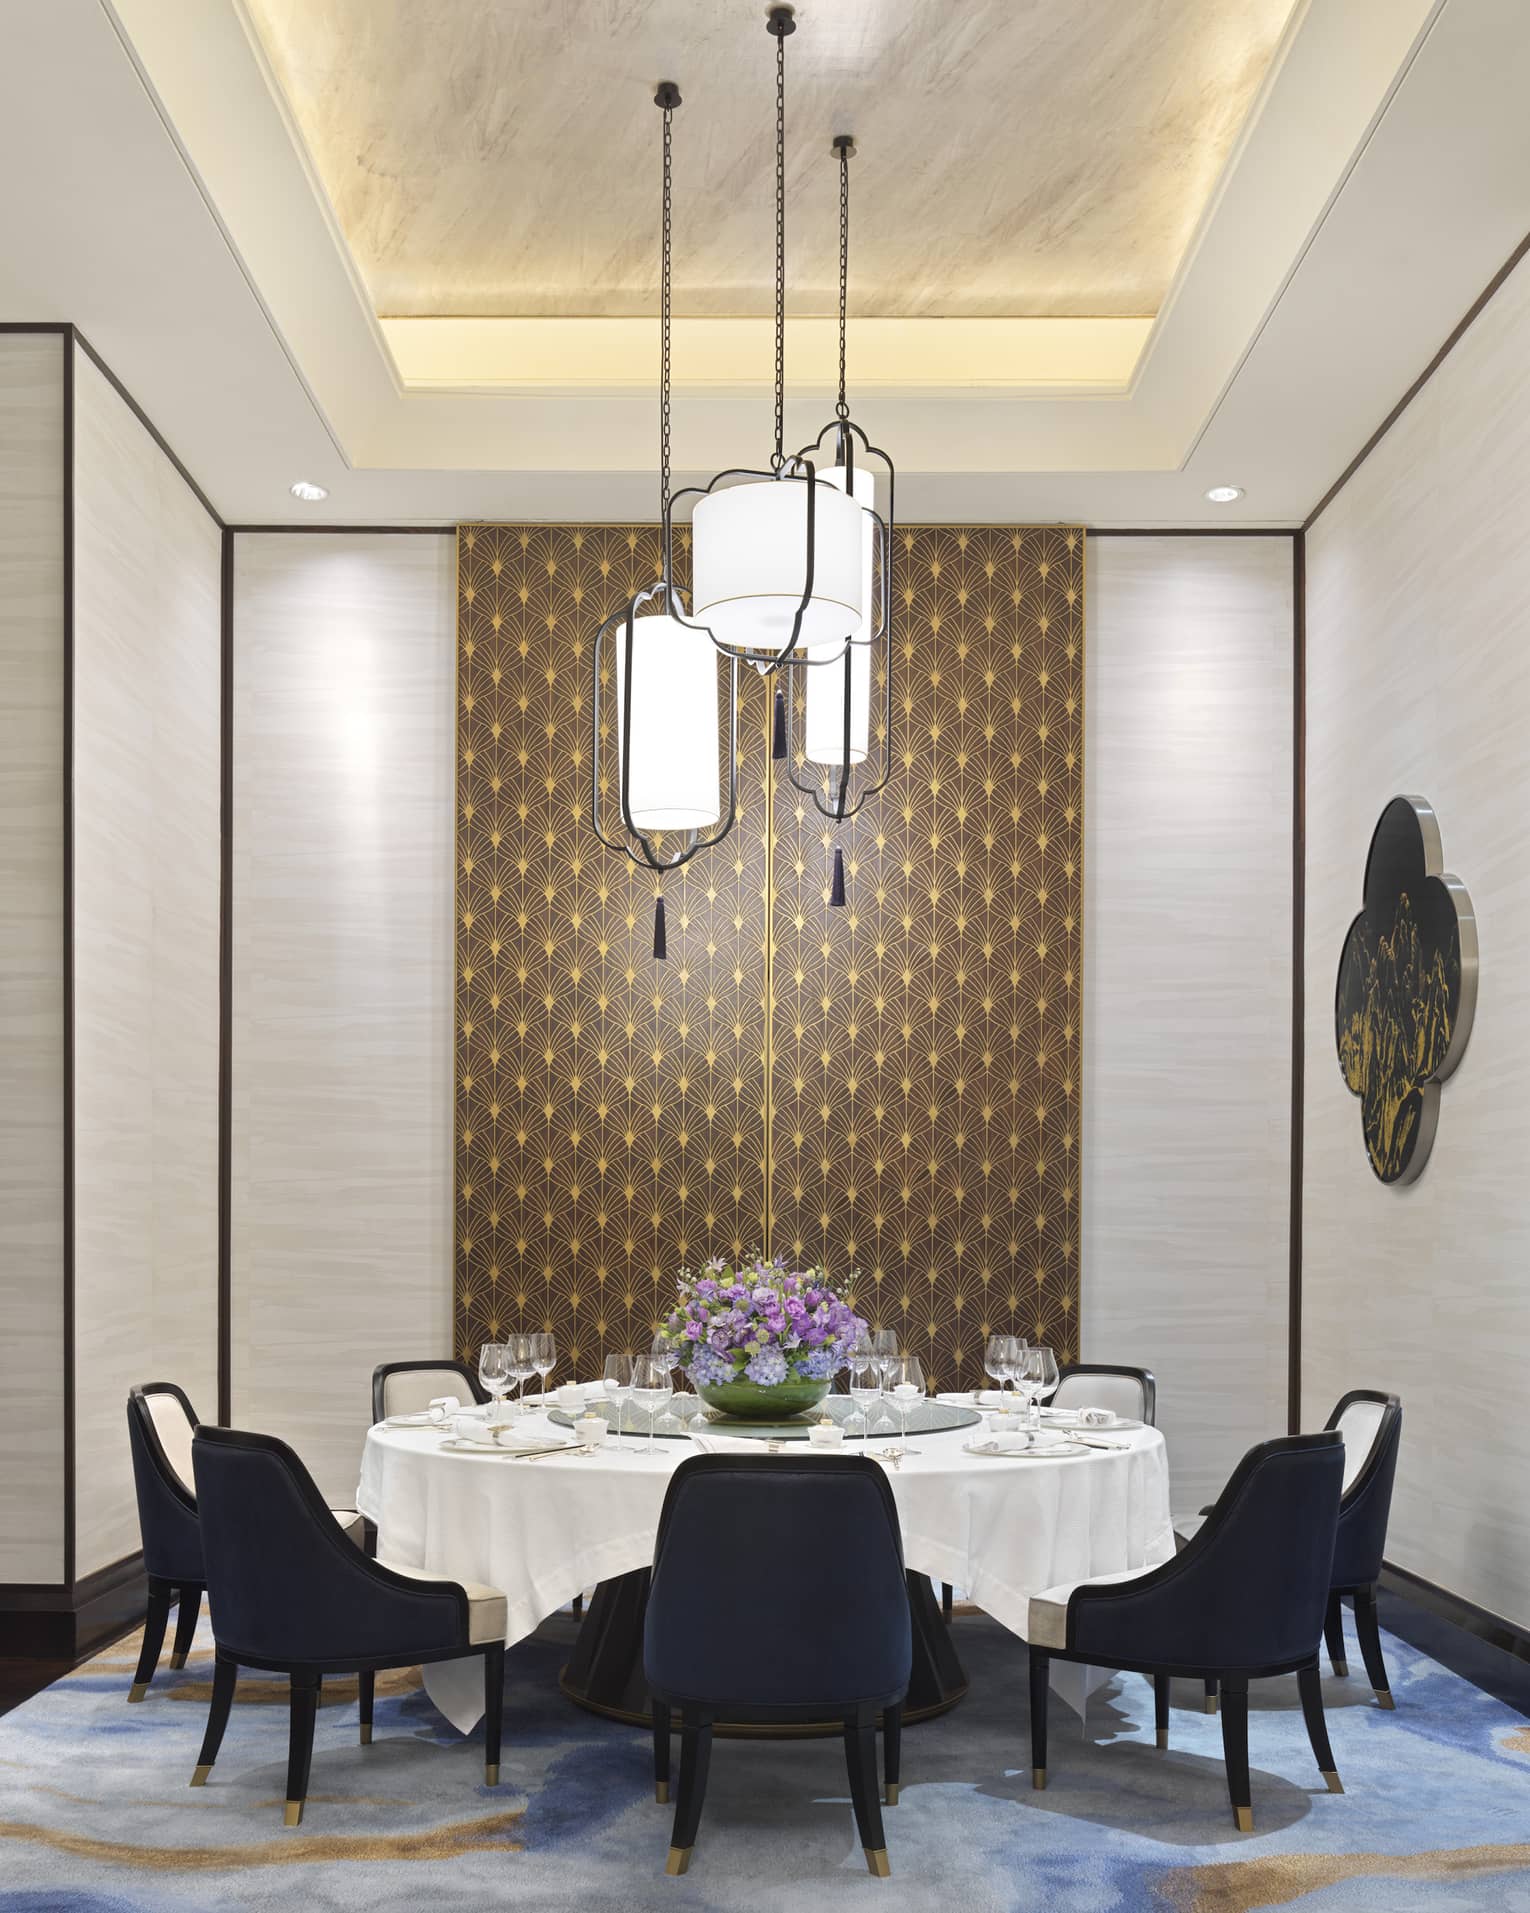 Zi Yat Heen private dining room with round table and white linens, eight blue chairs, watercolour carpeting, triple light fixtures from ceiling